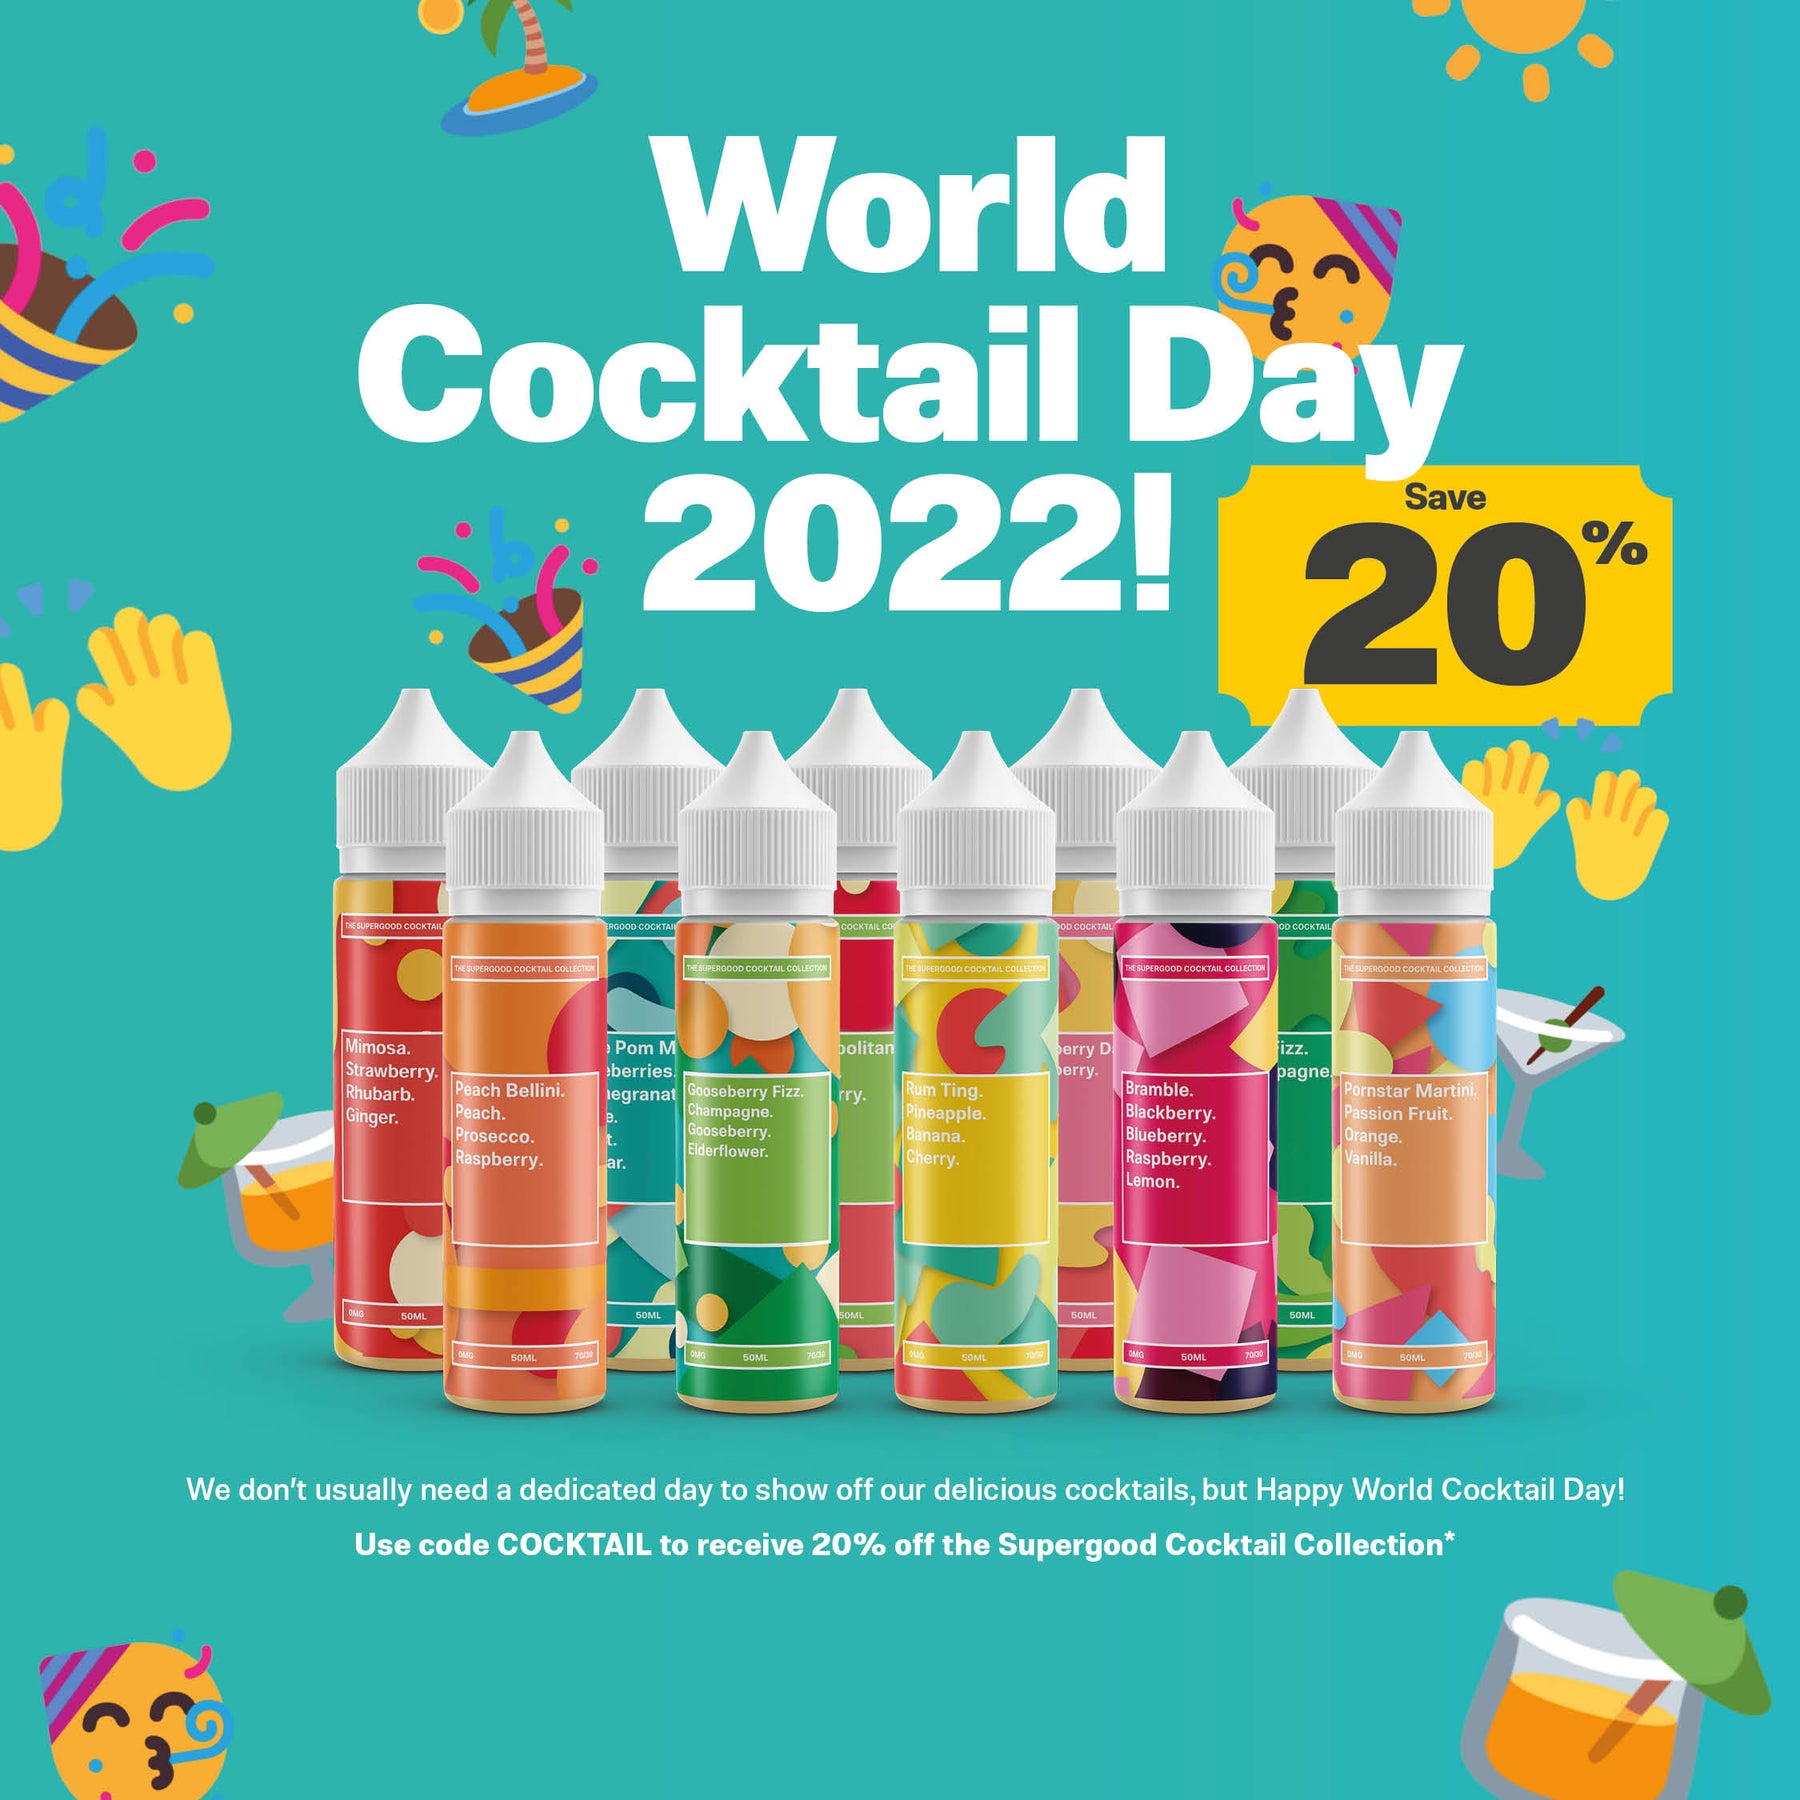 World Cocktail Day 2022.